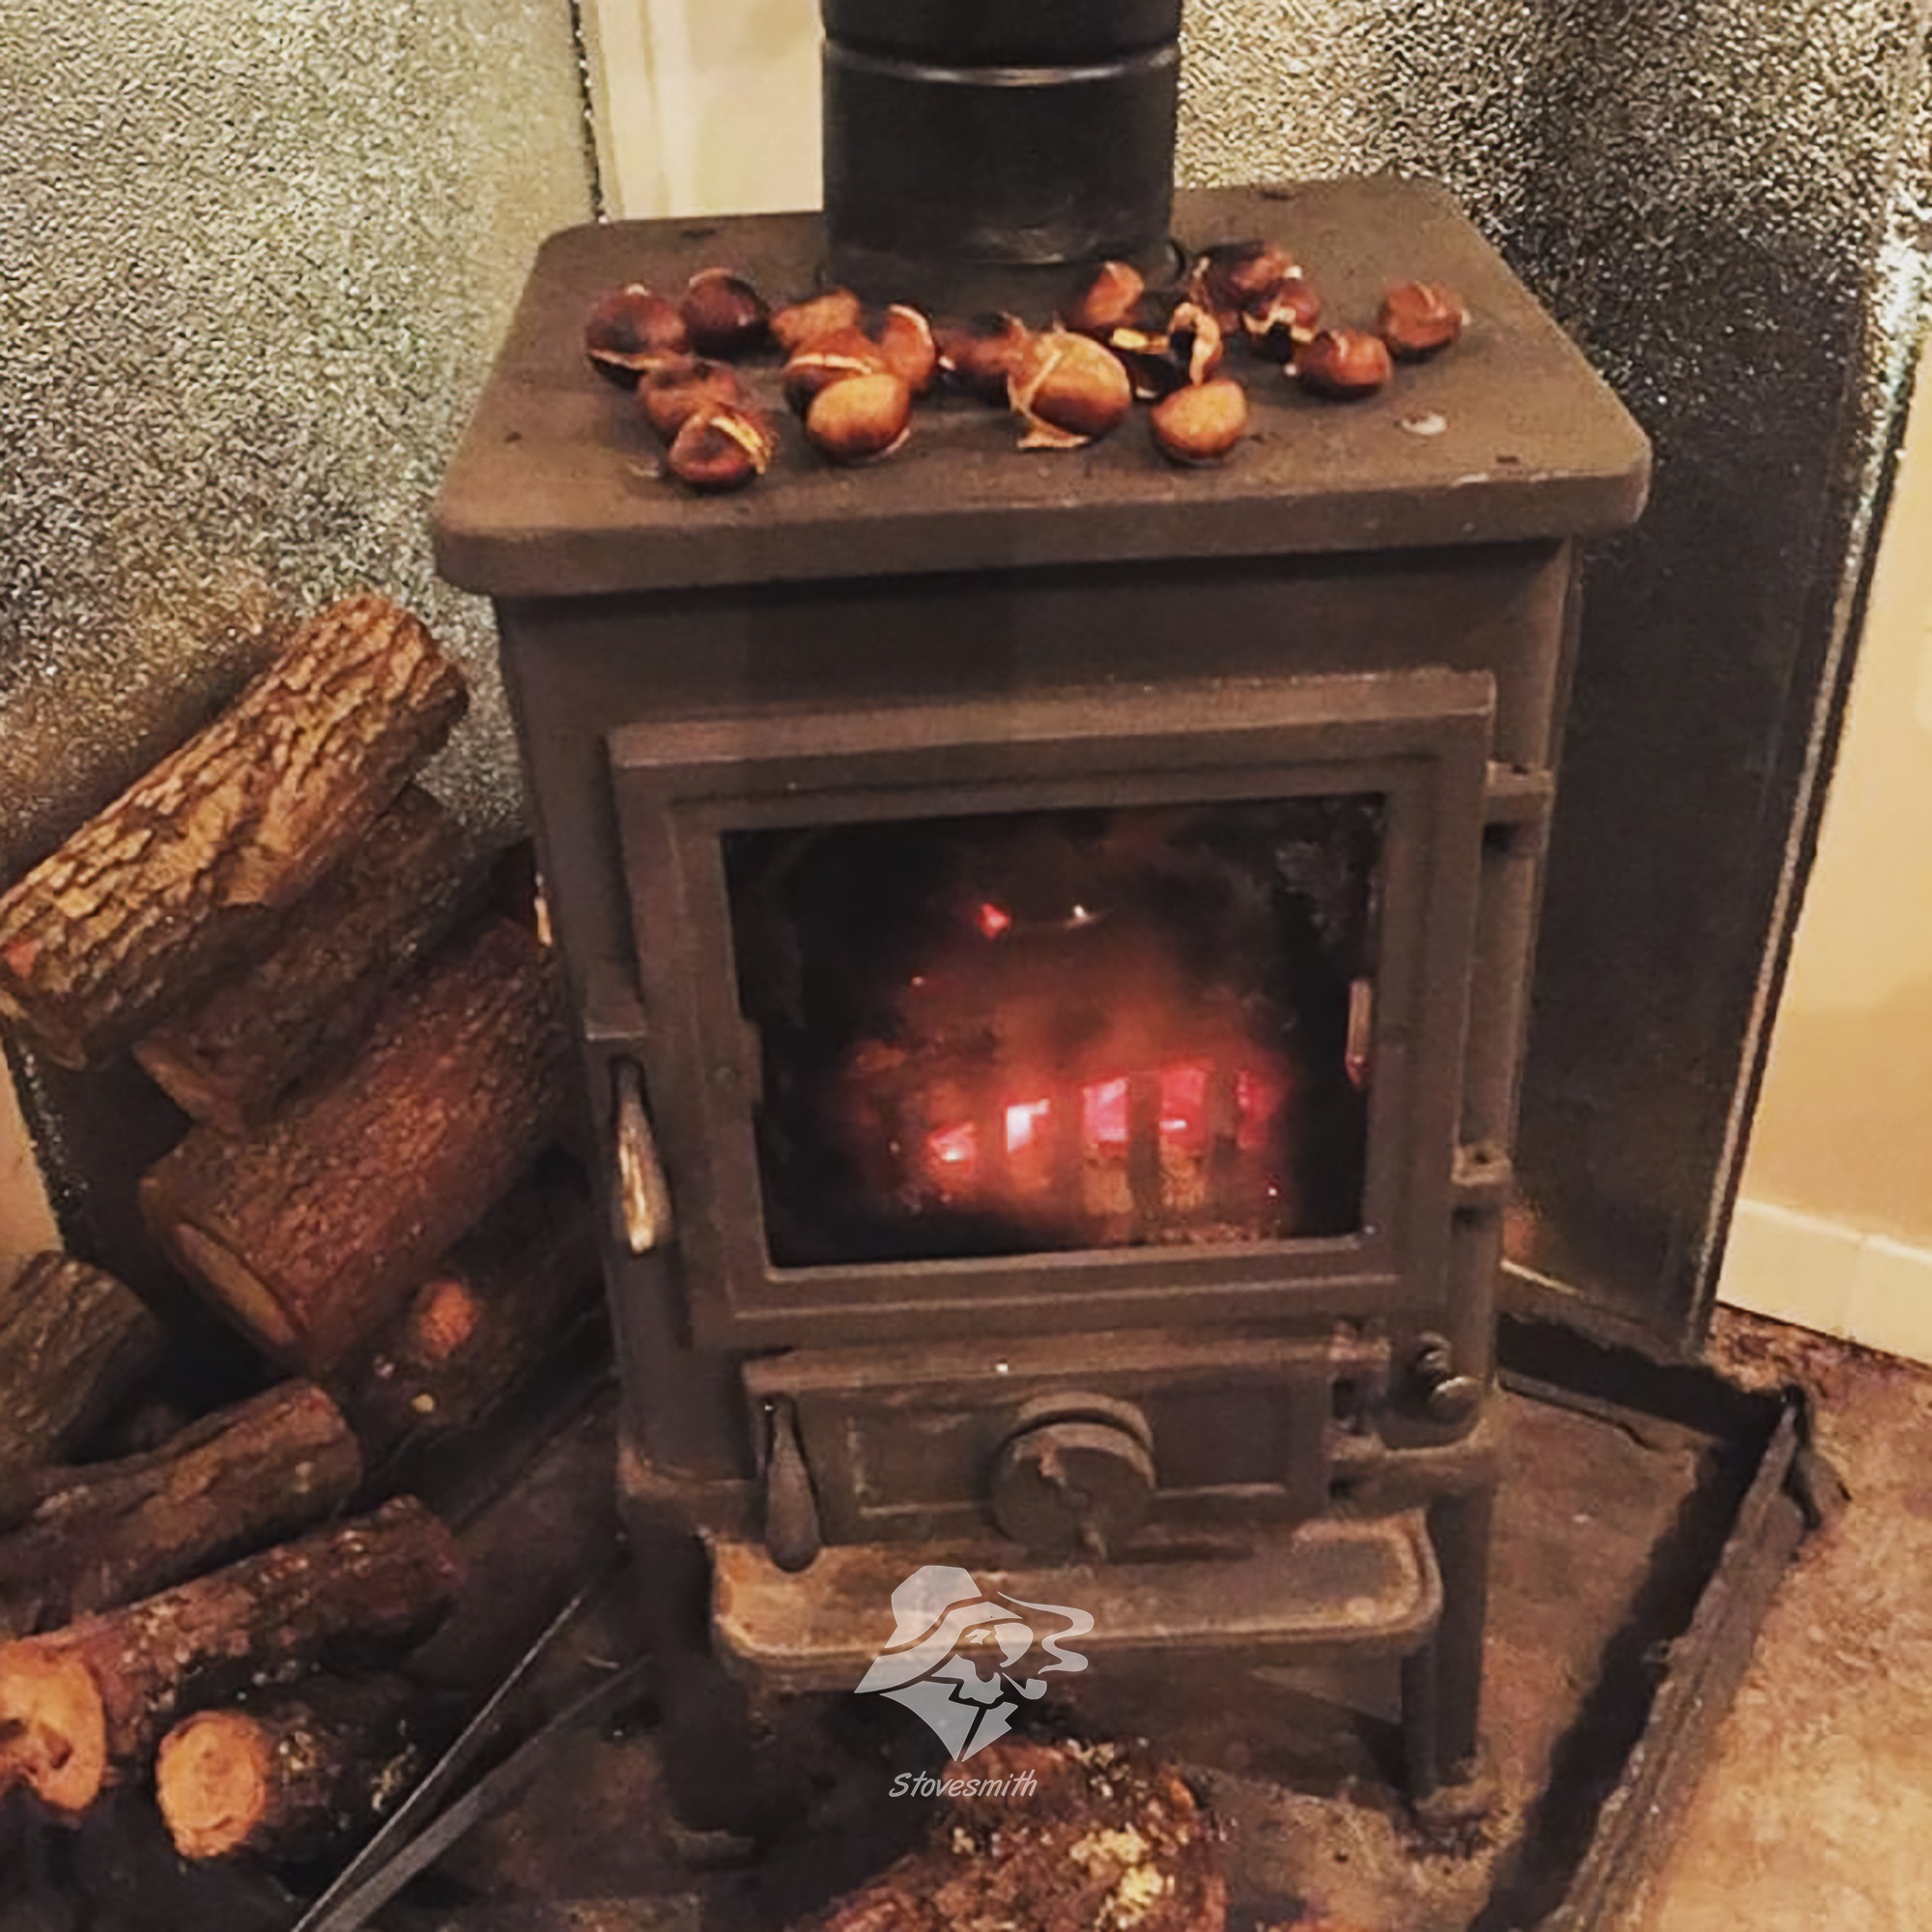 Stove with Oven, 120 KG Cast Iron Wood Stove | SS103